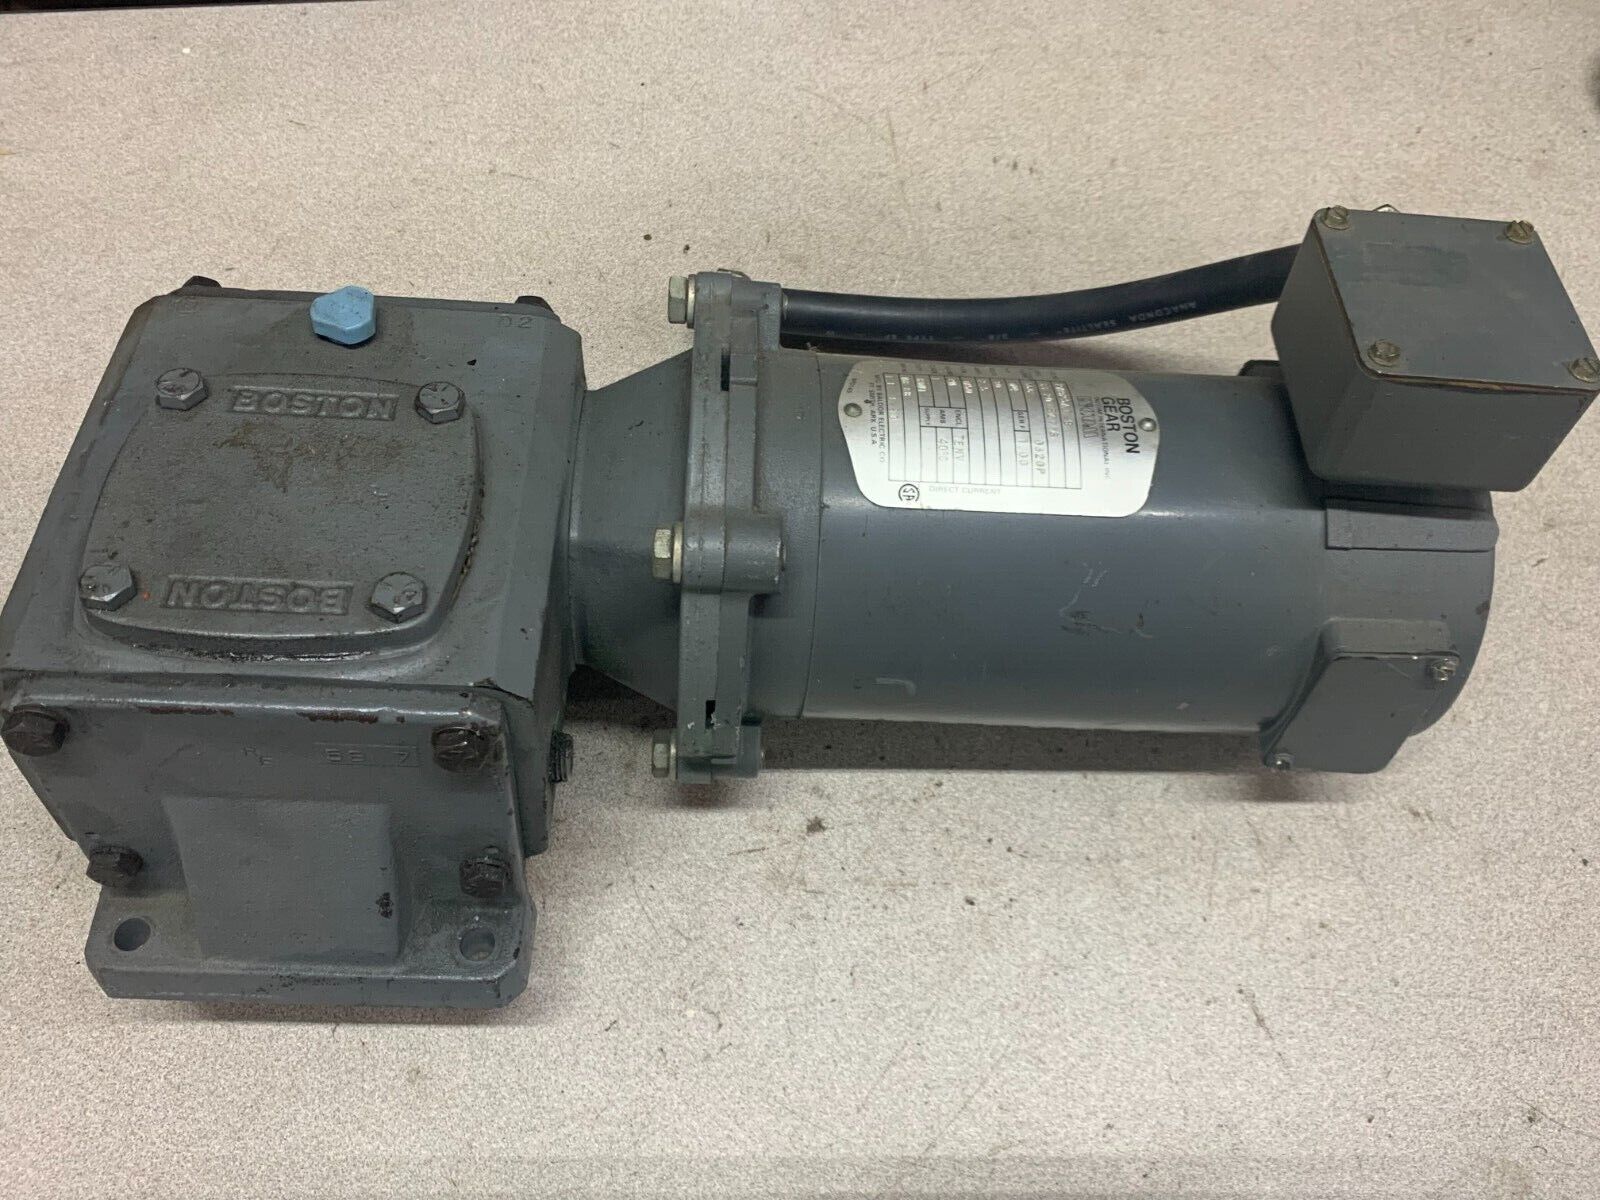 BOSTON GEAR 1/4HP 90VDC MOTOR PM925AT-B WITH REDUCER 60:1 RATIO F718-60-B5-J